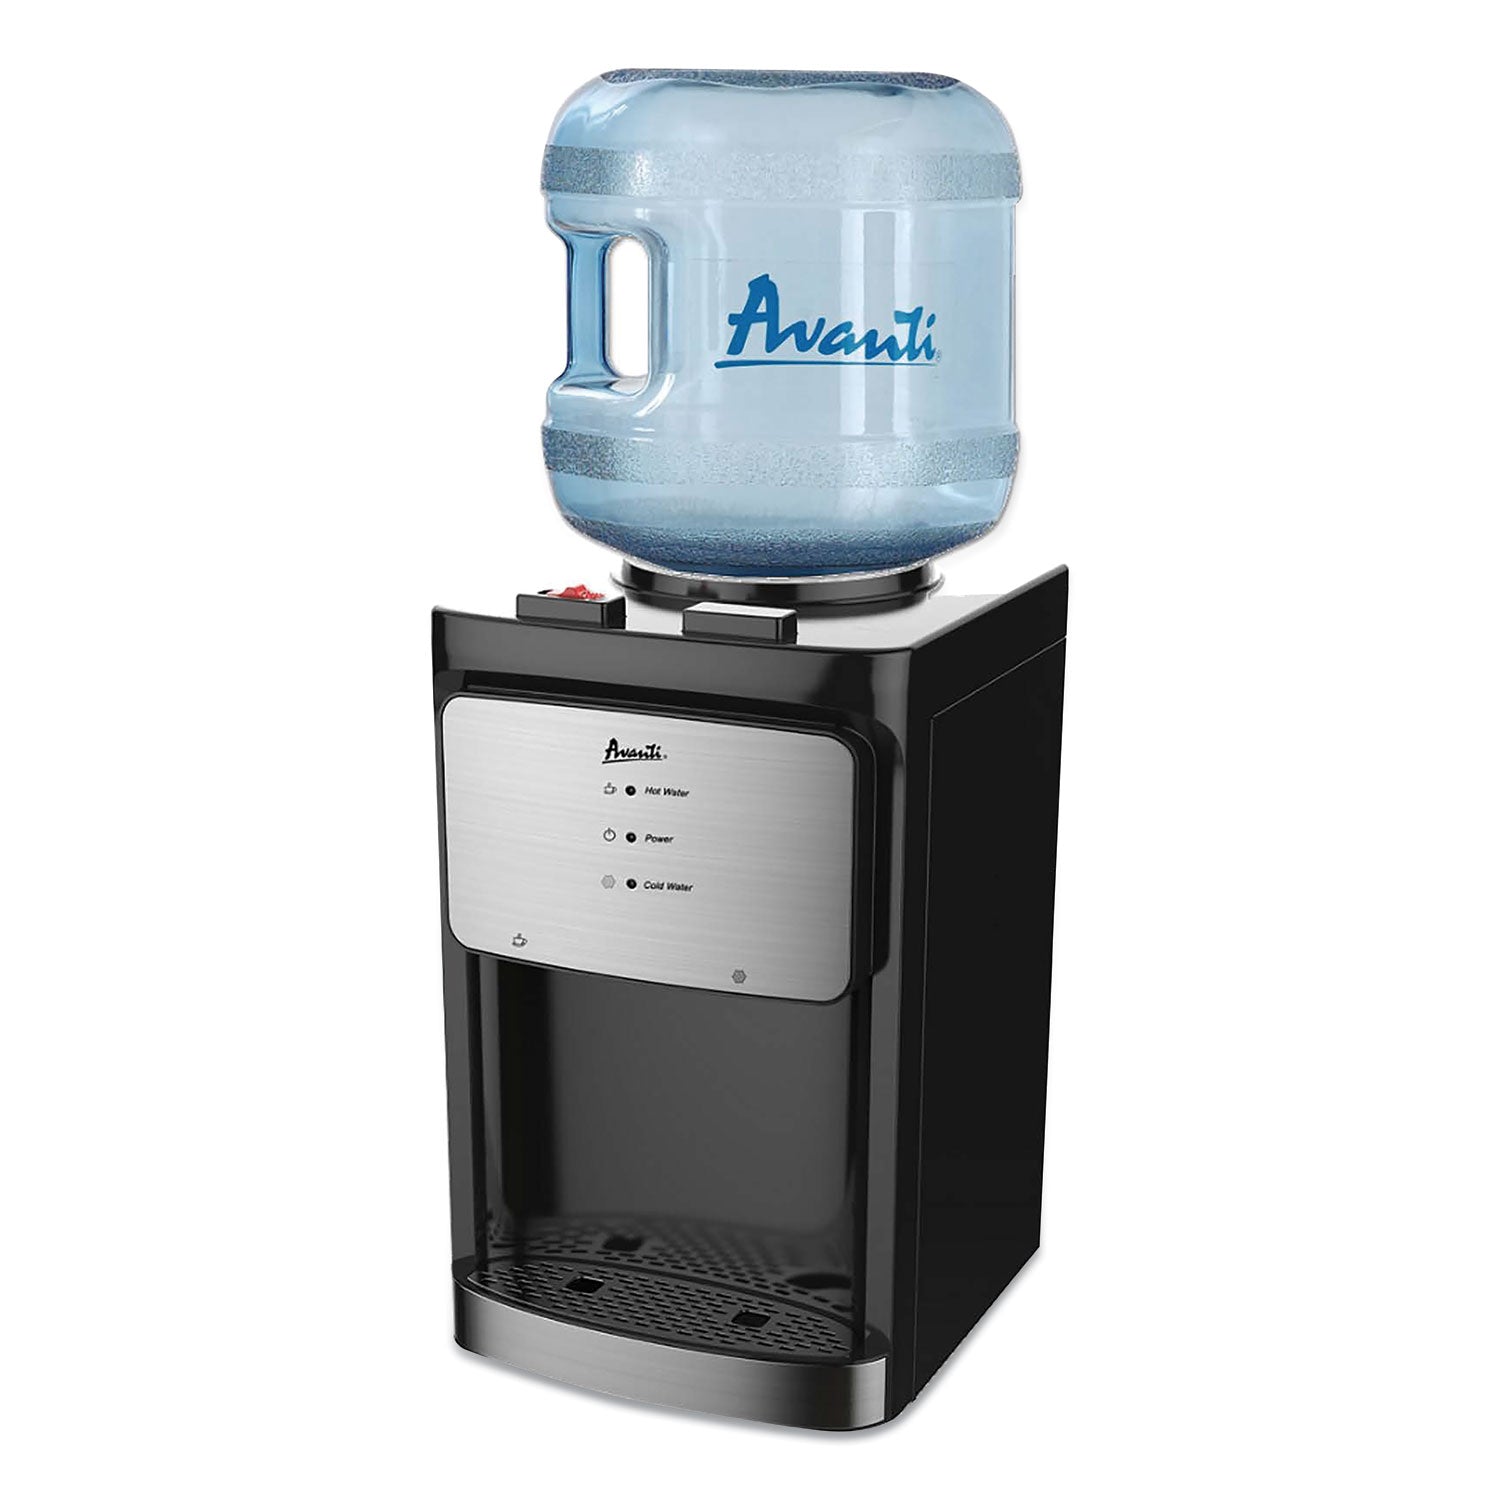 counter-top-thermoelectric-hot-and-cold-water-dispenser-3-to-5-gal-12-x-13-x-20-black_avawdt40q3sis - 1